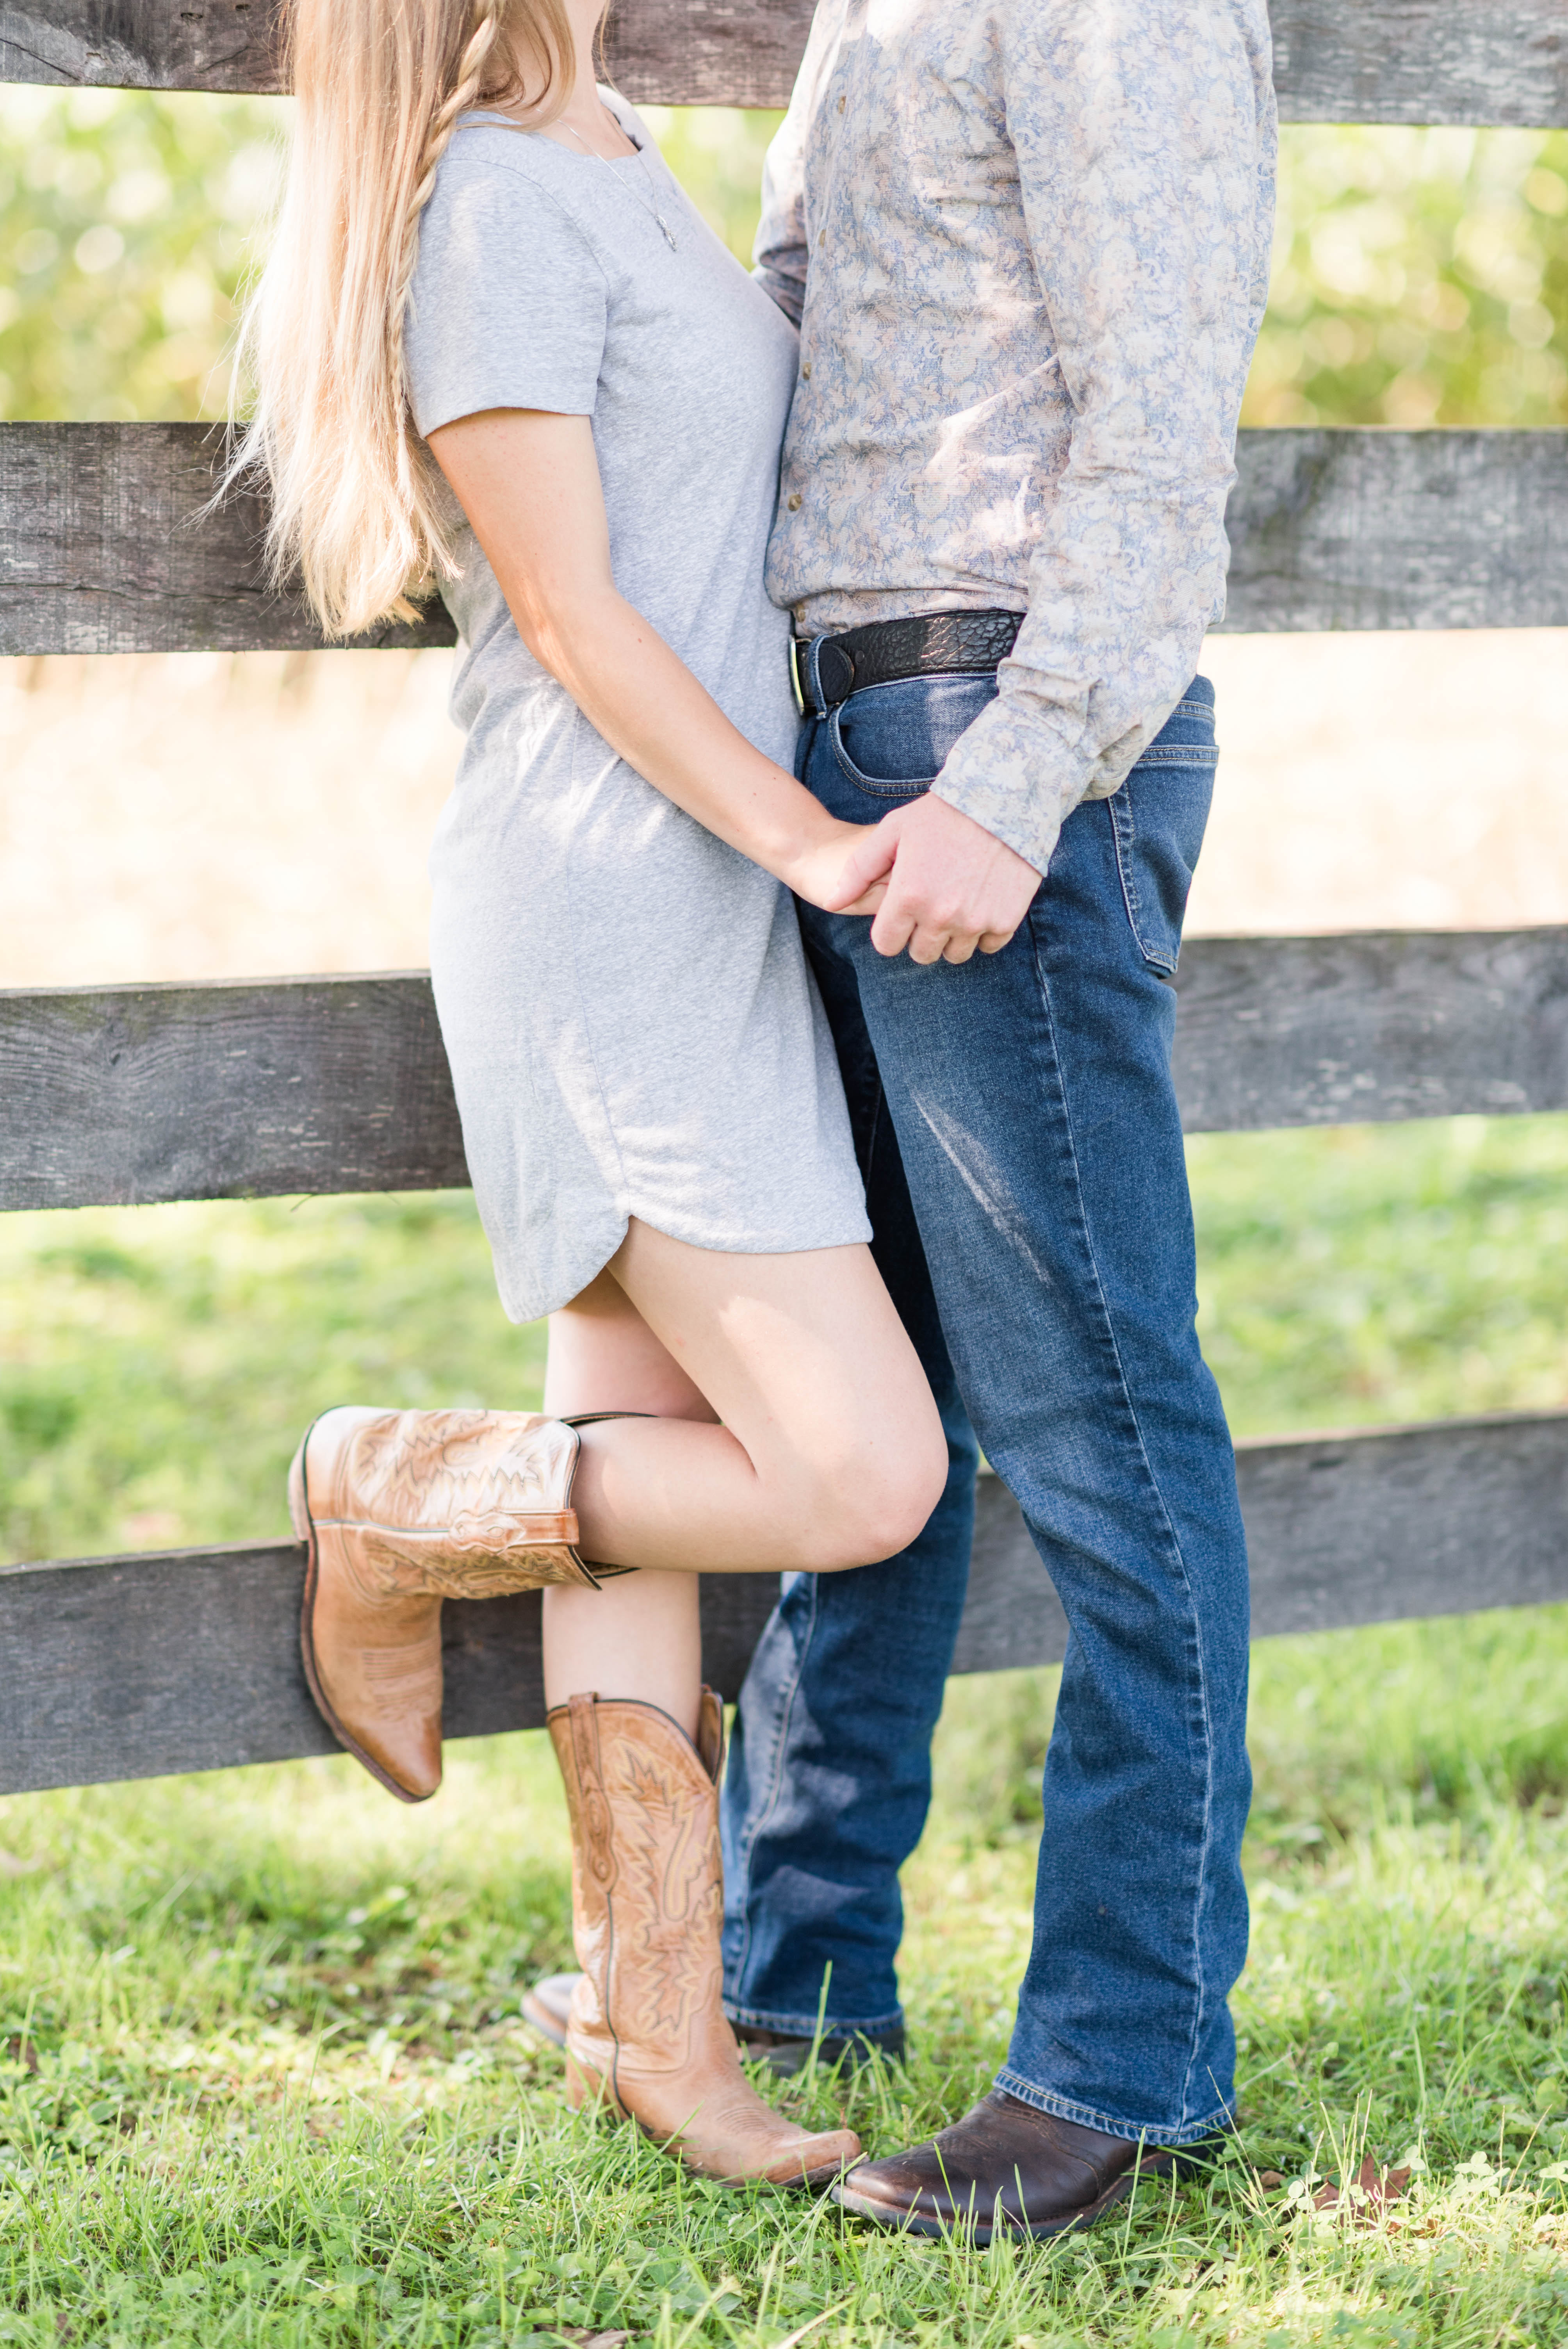 Countryside engagement session in marietta ohio - Sweet Williams photography, Rebecca musayev